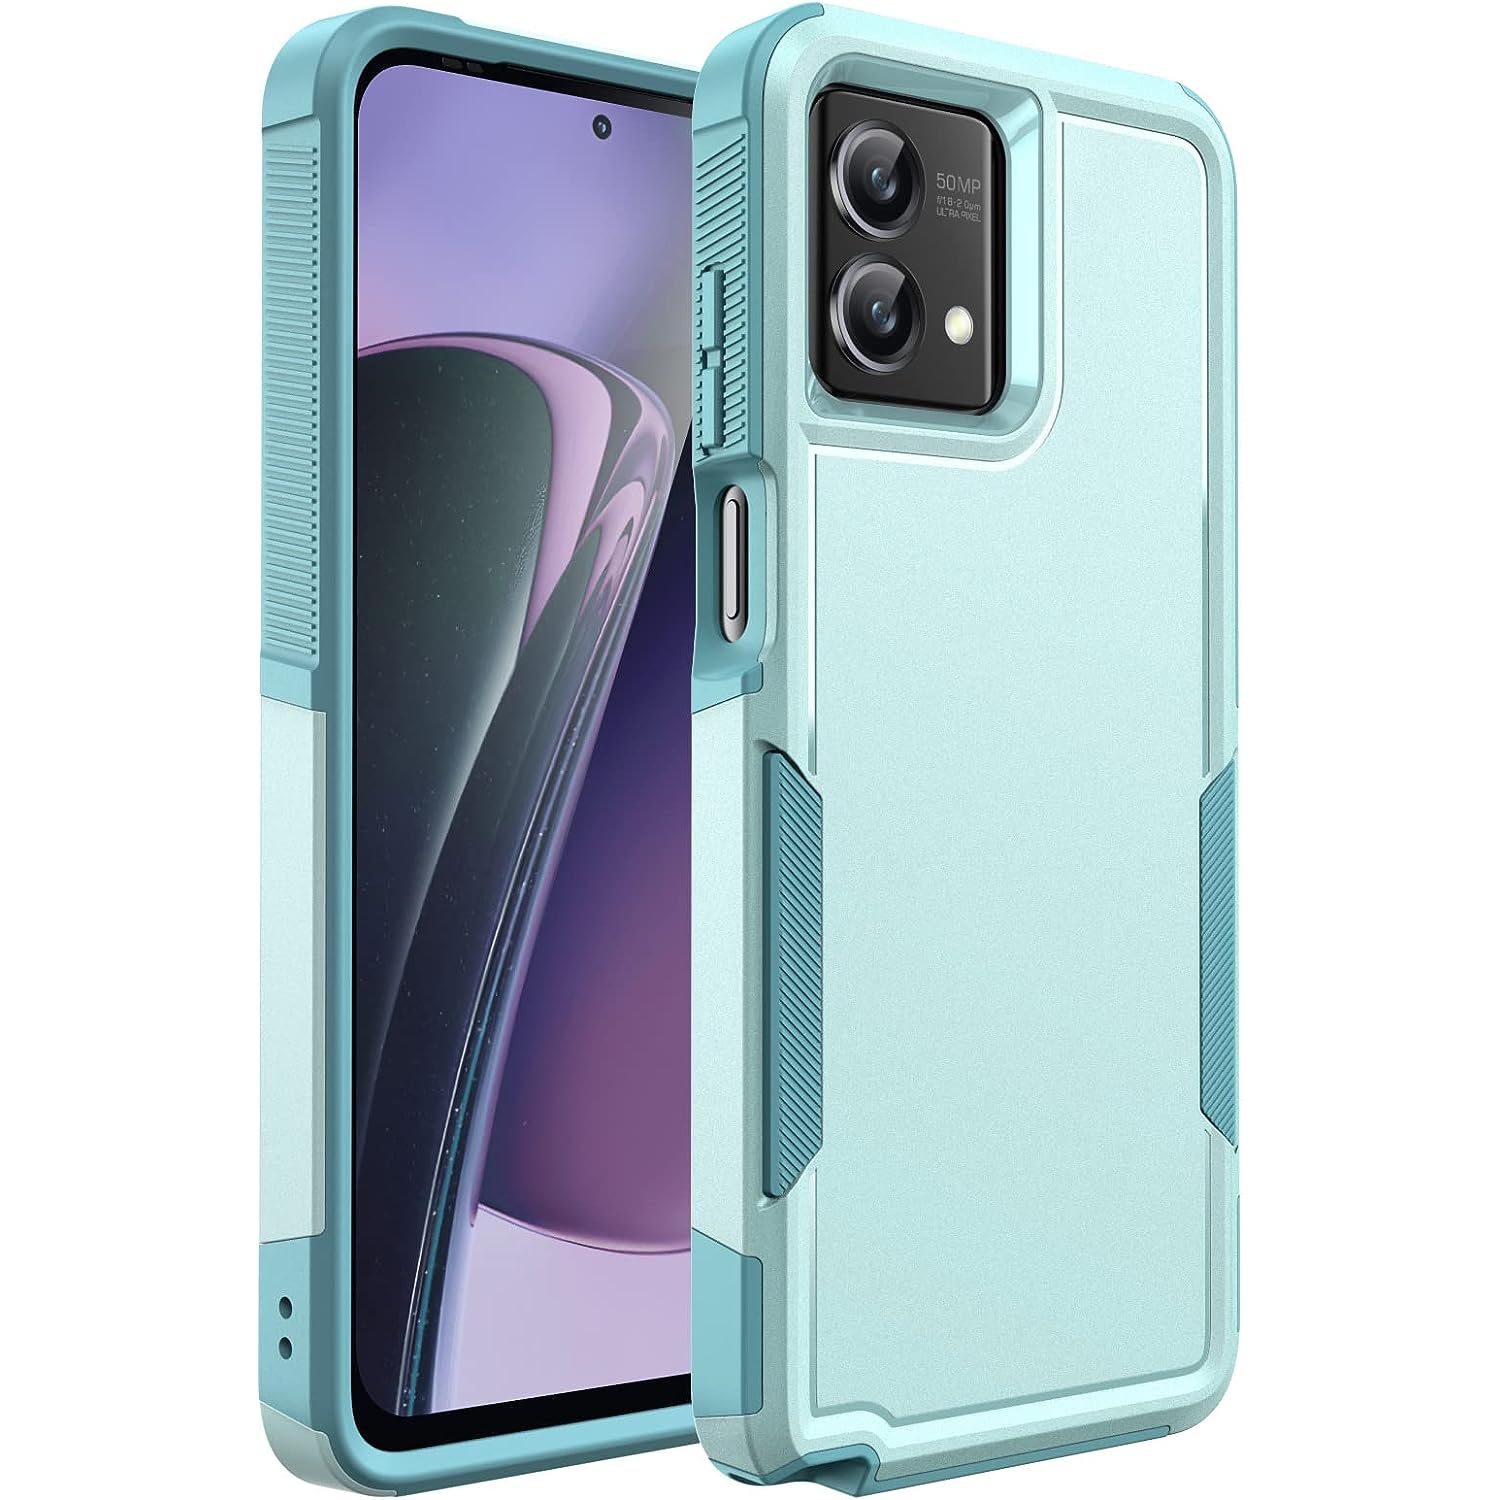 [CS] Dual Layers Heavy Duty Rubber Armor Hard Case Cover for Motorola Moto G 5G 2024, Teal